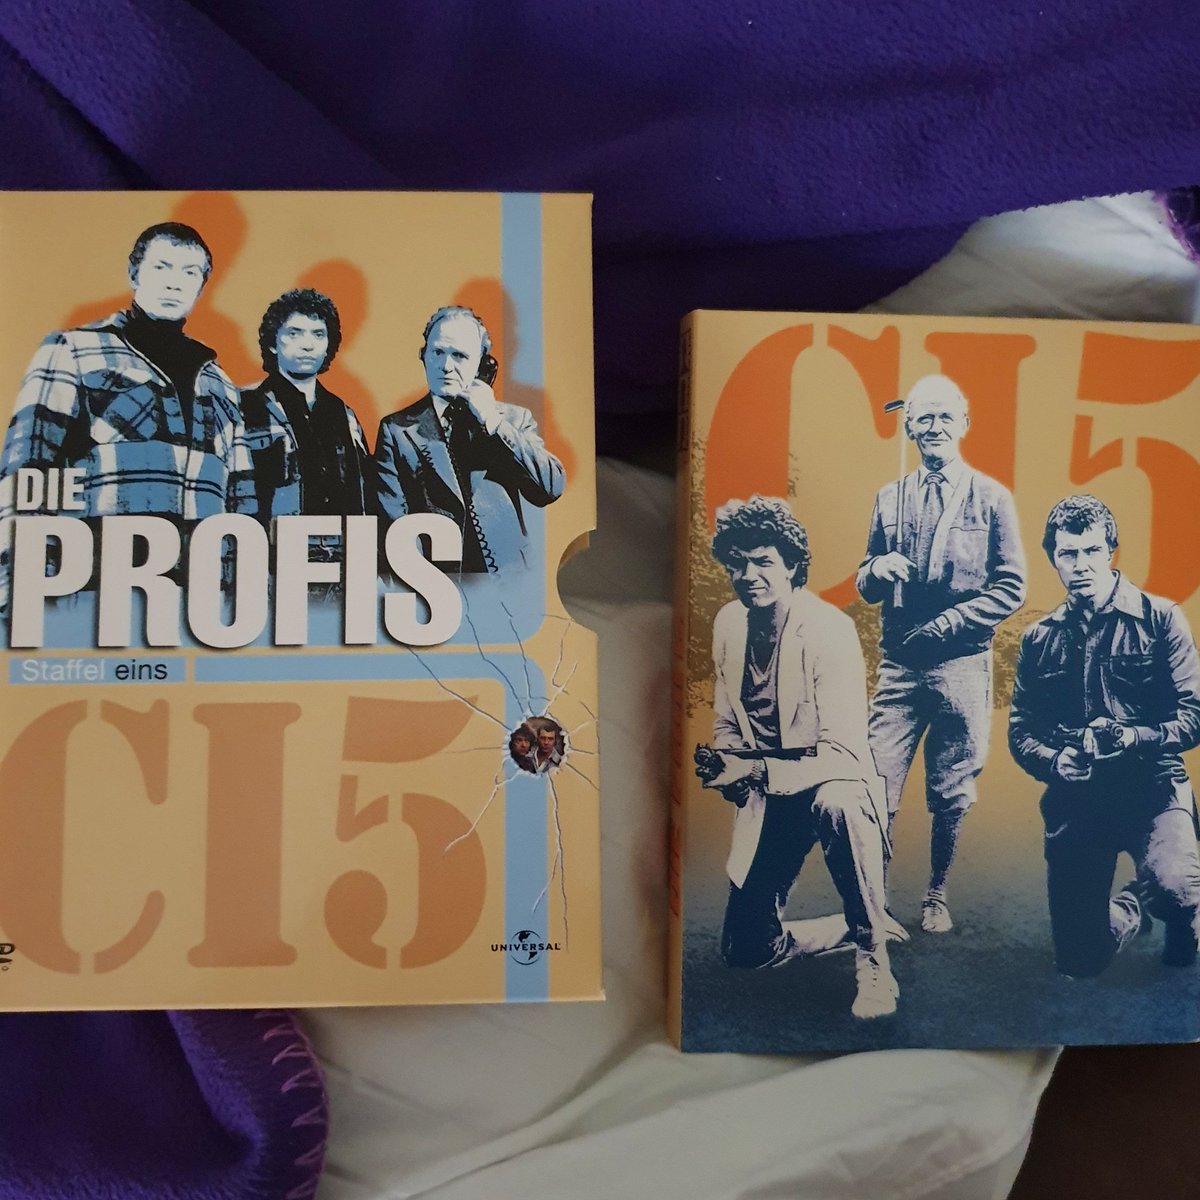 Going to start to re-watch this cos it's the best way to spend a sunday
#dieprofis #theprofessionals #ci5 #lewiscollins #martinshaw #gordonjackson #williambodie #classic @CI5BDC